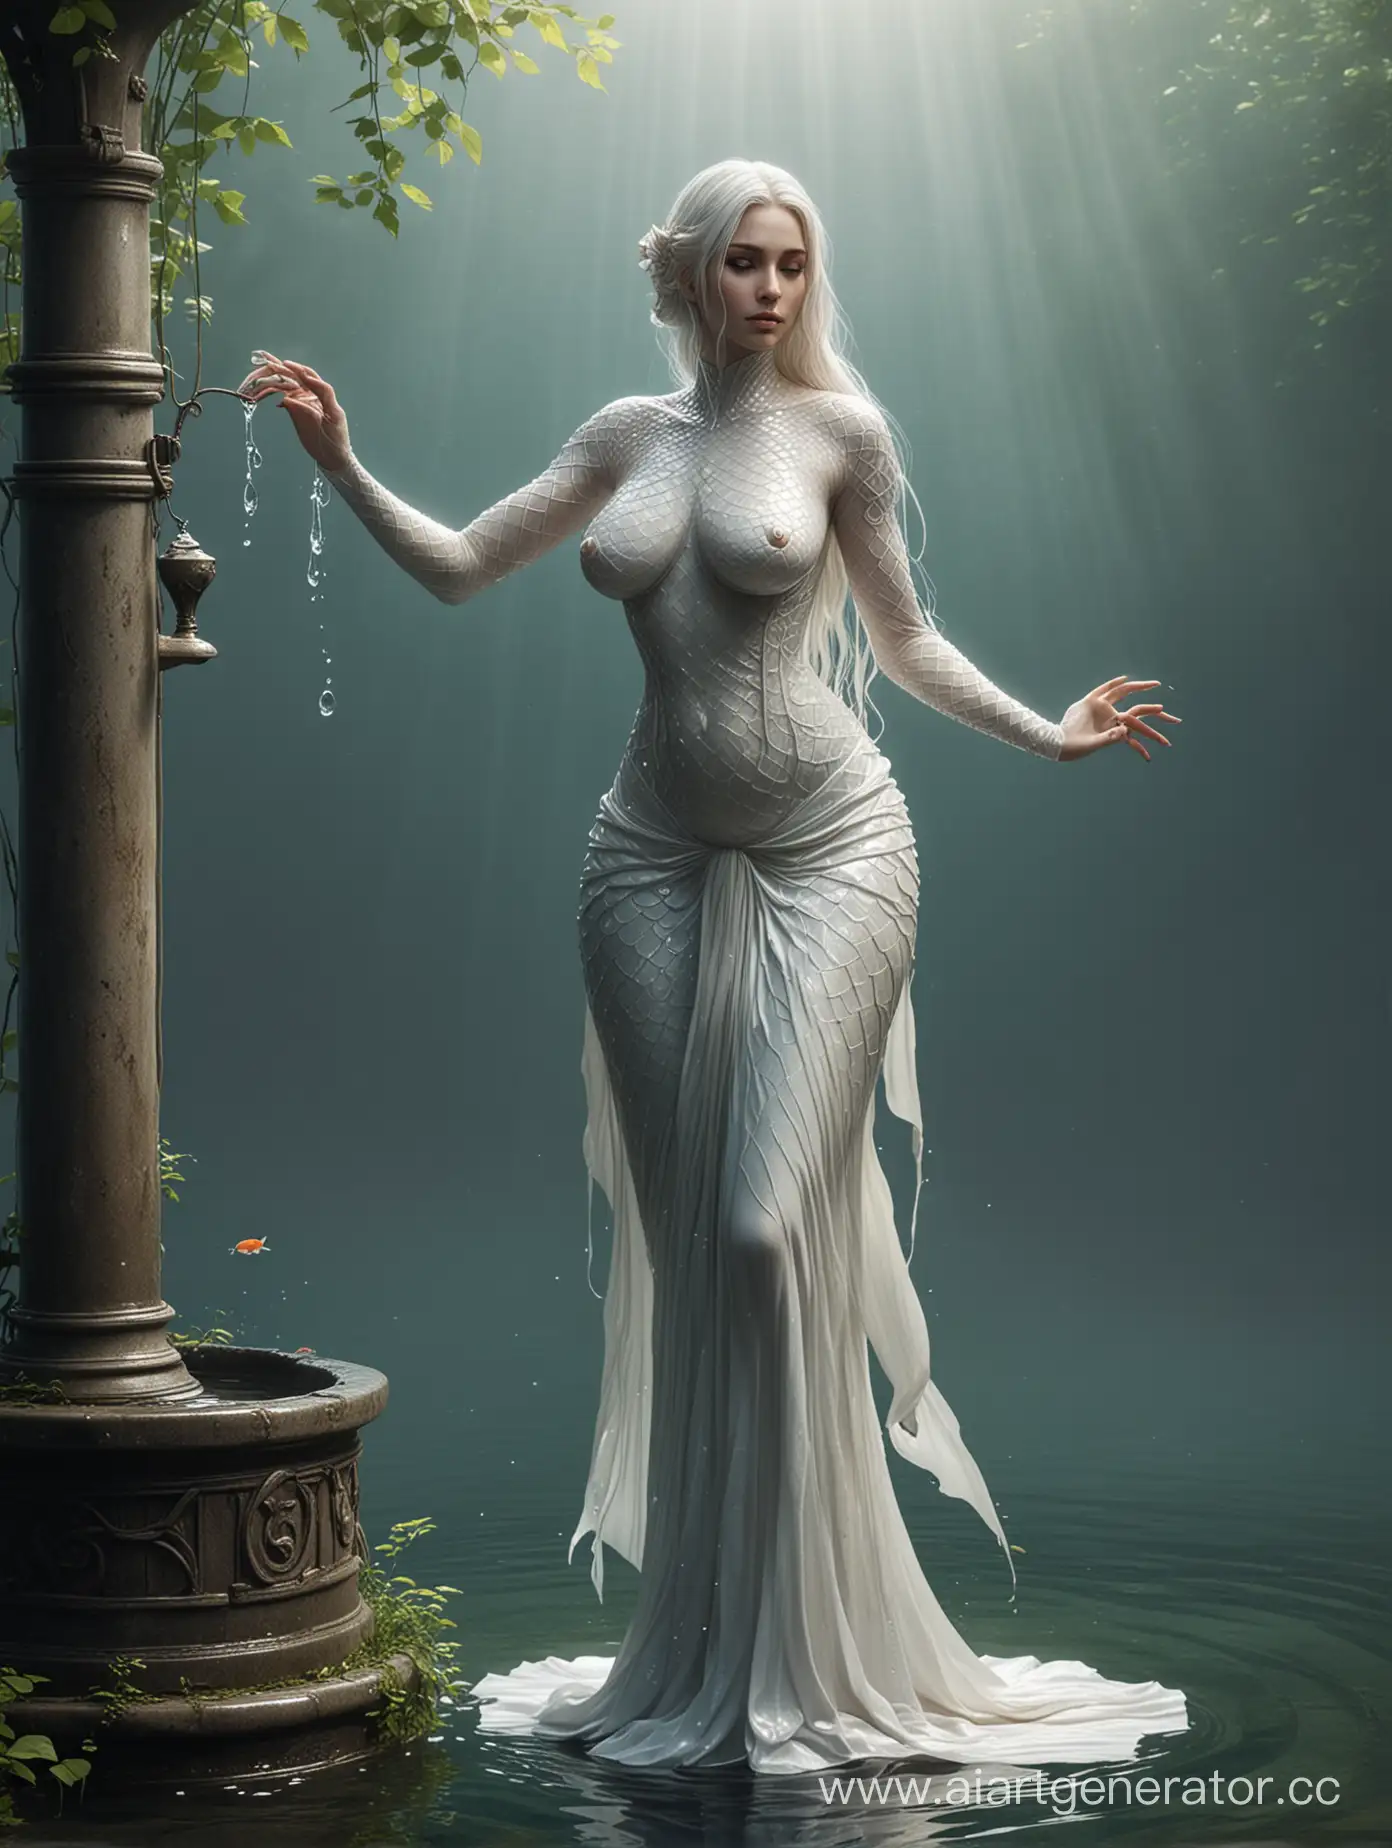 Curvy-FishPerson-by-the-Well-Sensual-Aquatic-Beauty-in-Light-Attire